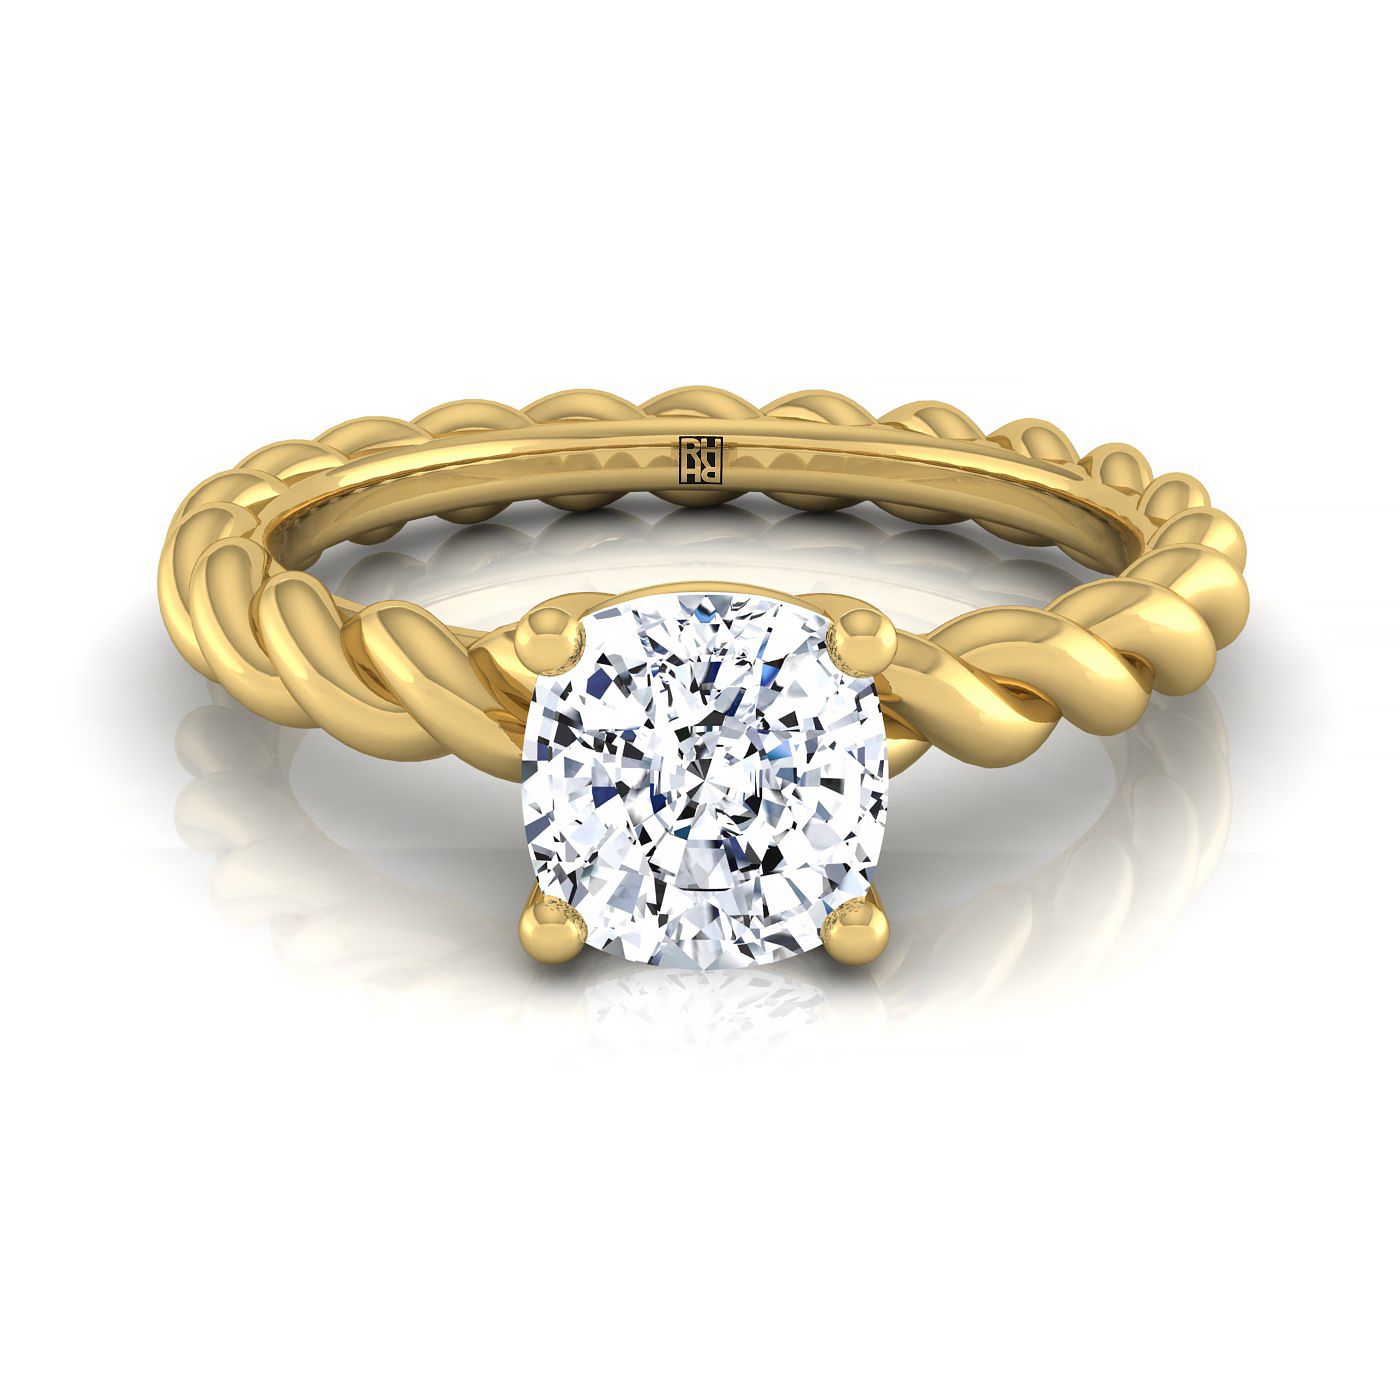 18K Yellow Gold Cushion  Twisted Rope Braid Solitaire Band